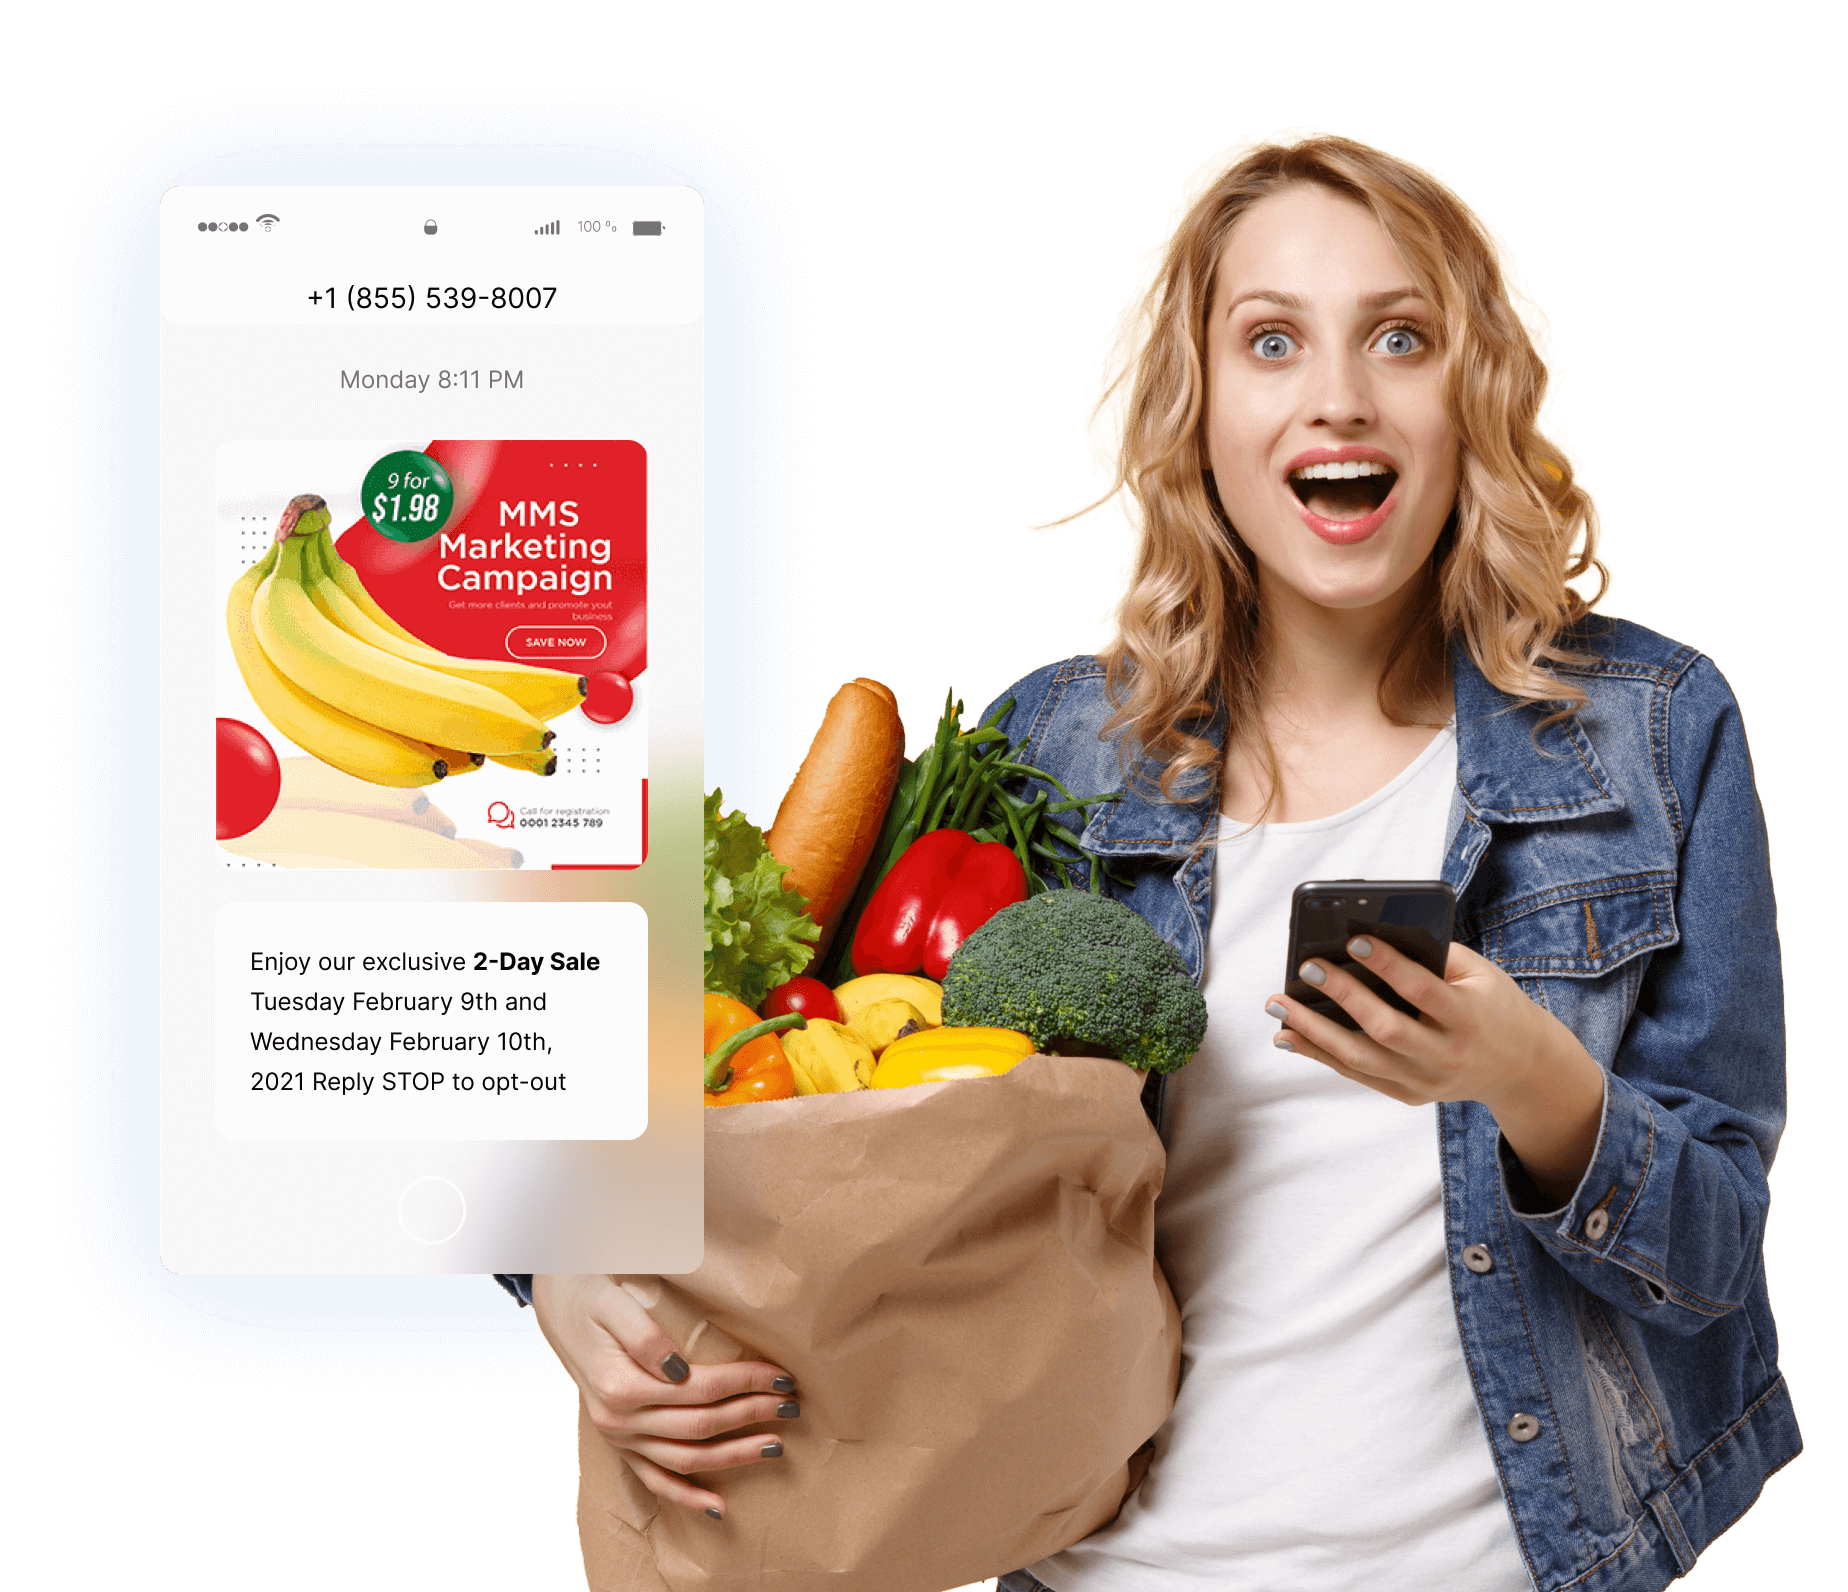 Grocery stores can send notifications of deals and discounts through SMS or MMS to attract customers to the store